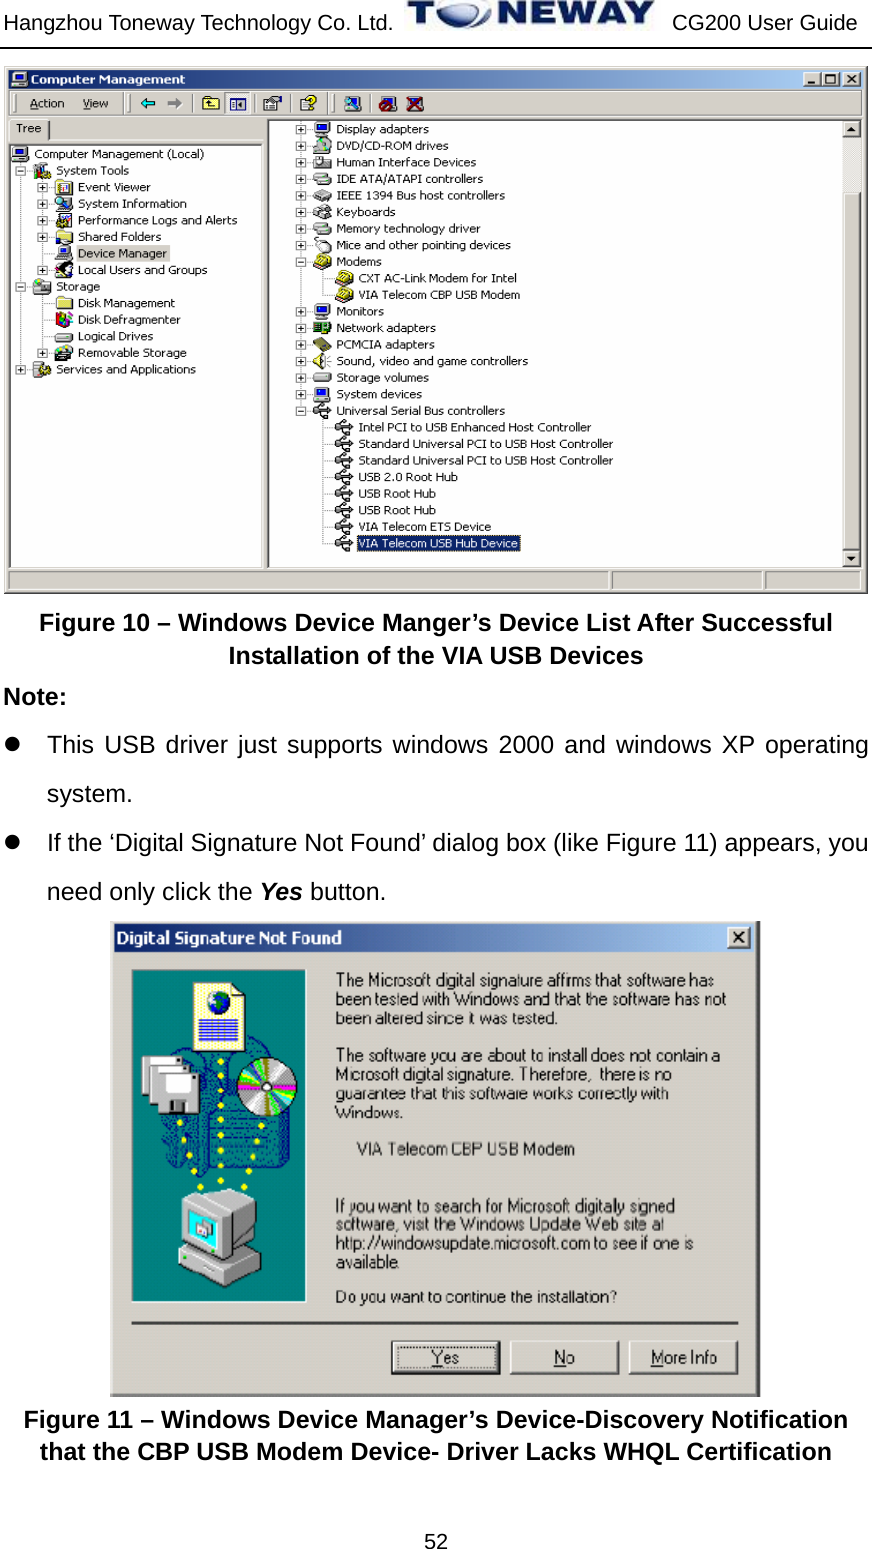 Hangzhou Toneway Technology Co. Ltd.    CG200 User Guide 52  Figure 10 – Windows Device Manger’s Device List After Successful Installation of the VIA USB Devices Note:  z  This USB driver just supports windows 2000 and windows XP operating system. z  If the ‘Digital Signature Not Found’ dialog box (like Figure 11) appears, you need only click the Yes button.  Figure 11 – Windows Device Manager’s Device-Discovery Notification that the CBP USB Modem Device- Driver Lacks WHQL Certification 